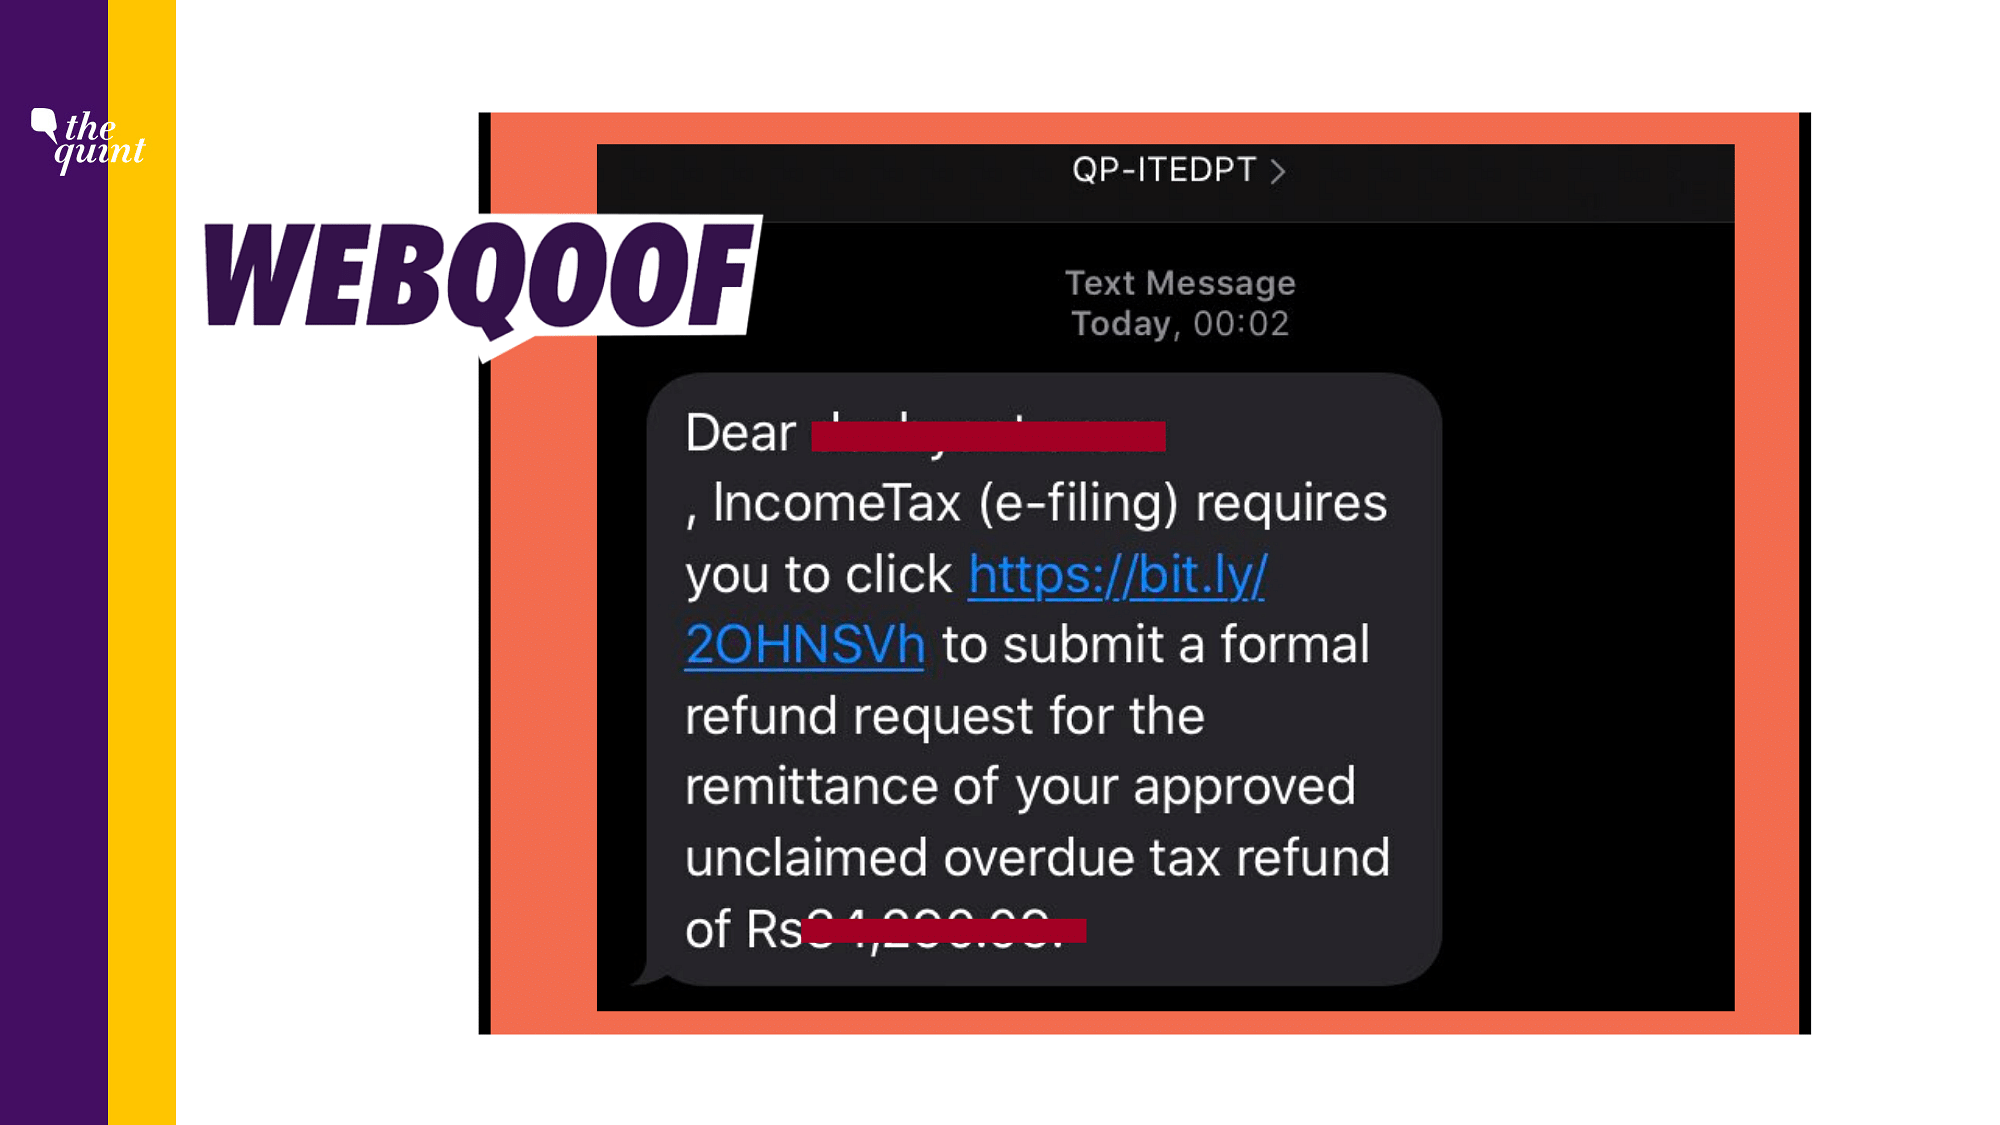 A hoax message with a link to request Income Tax refund has been sent to multiple people.&nbsp;